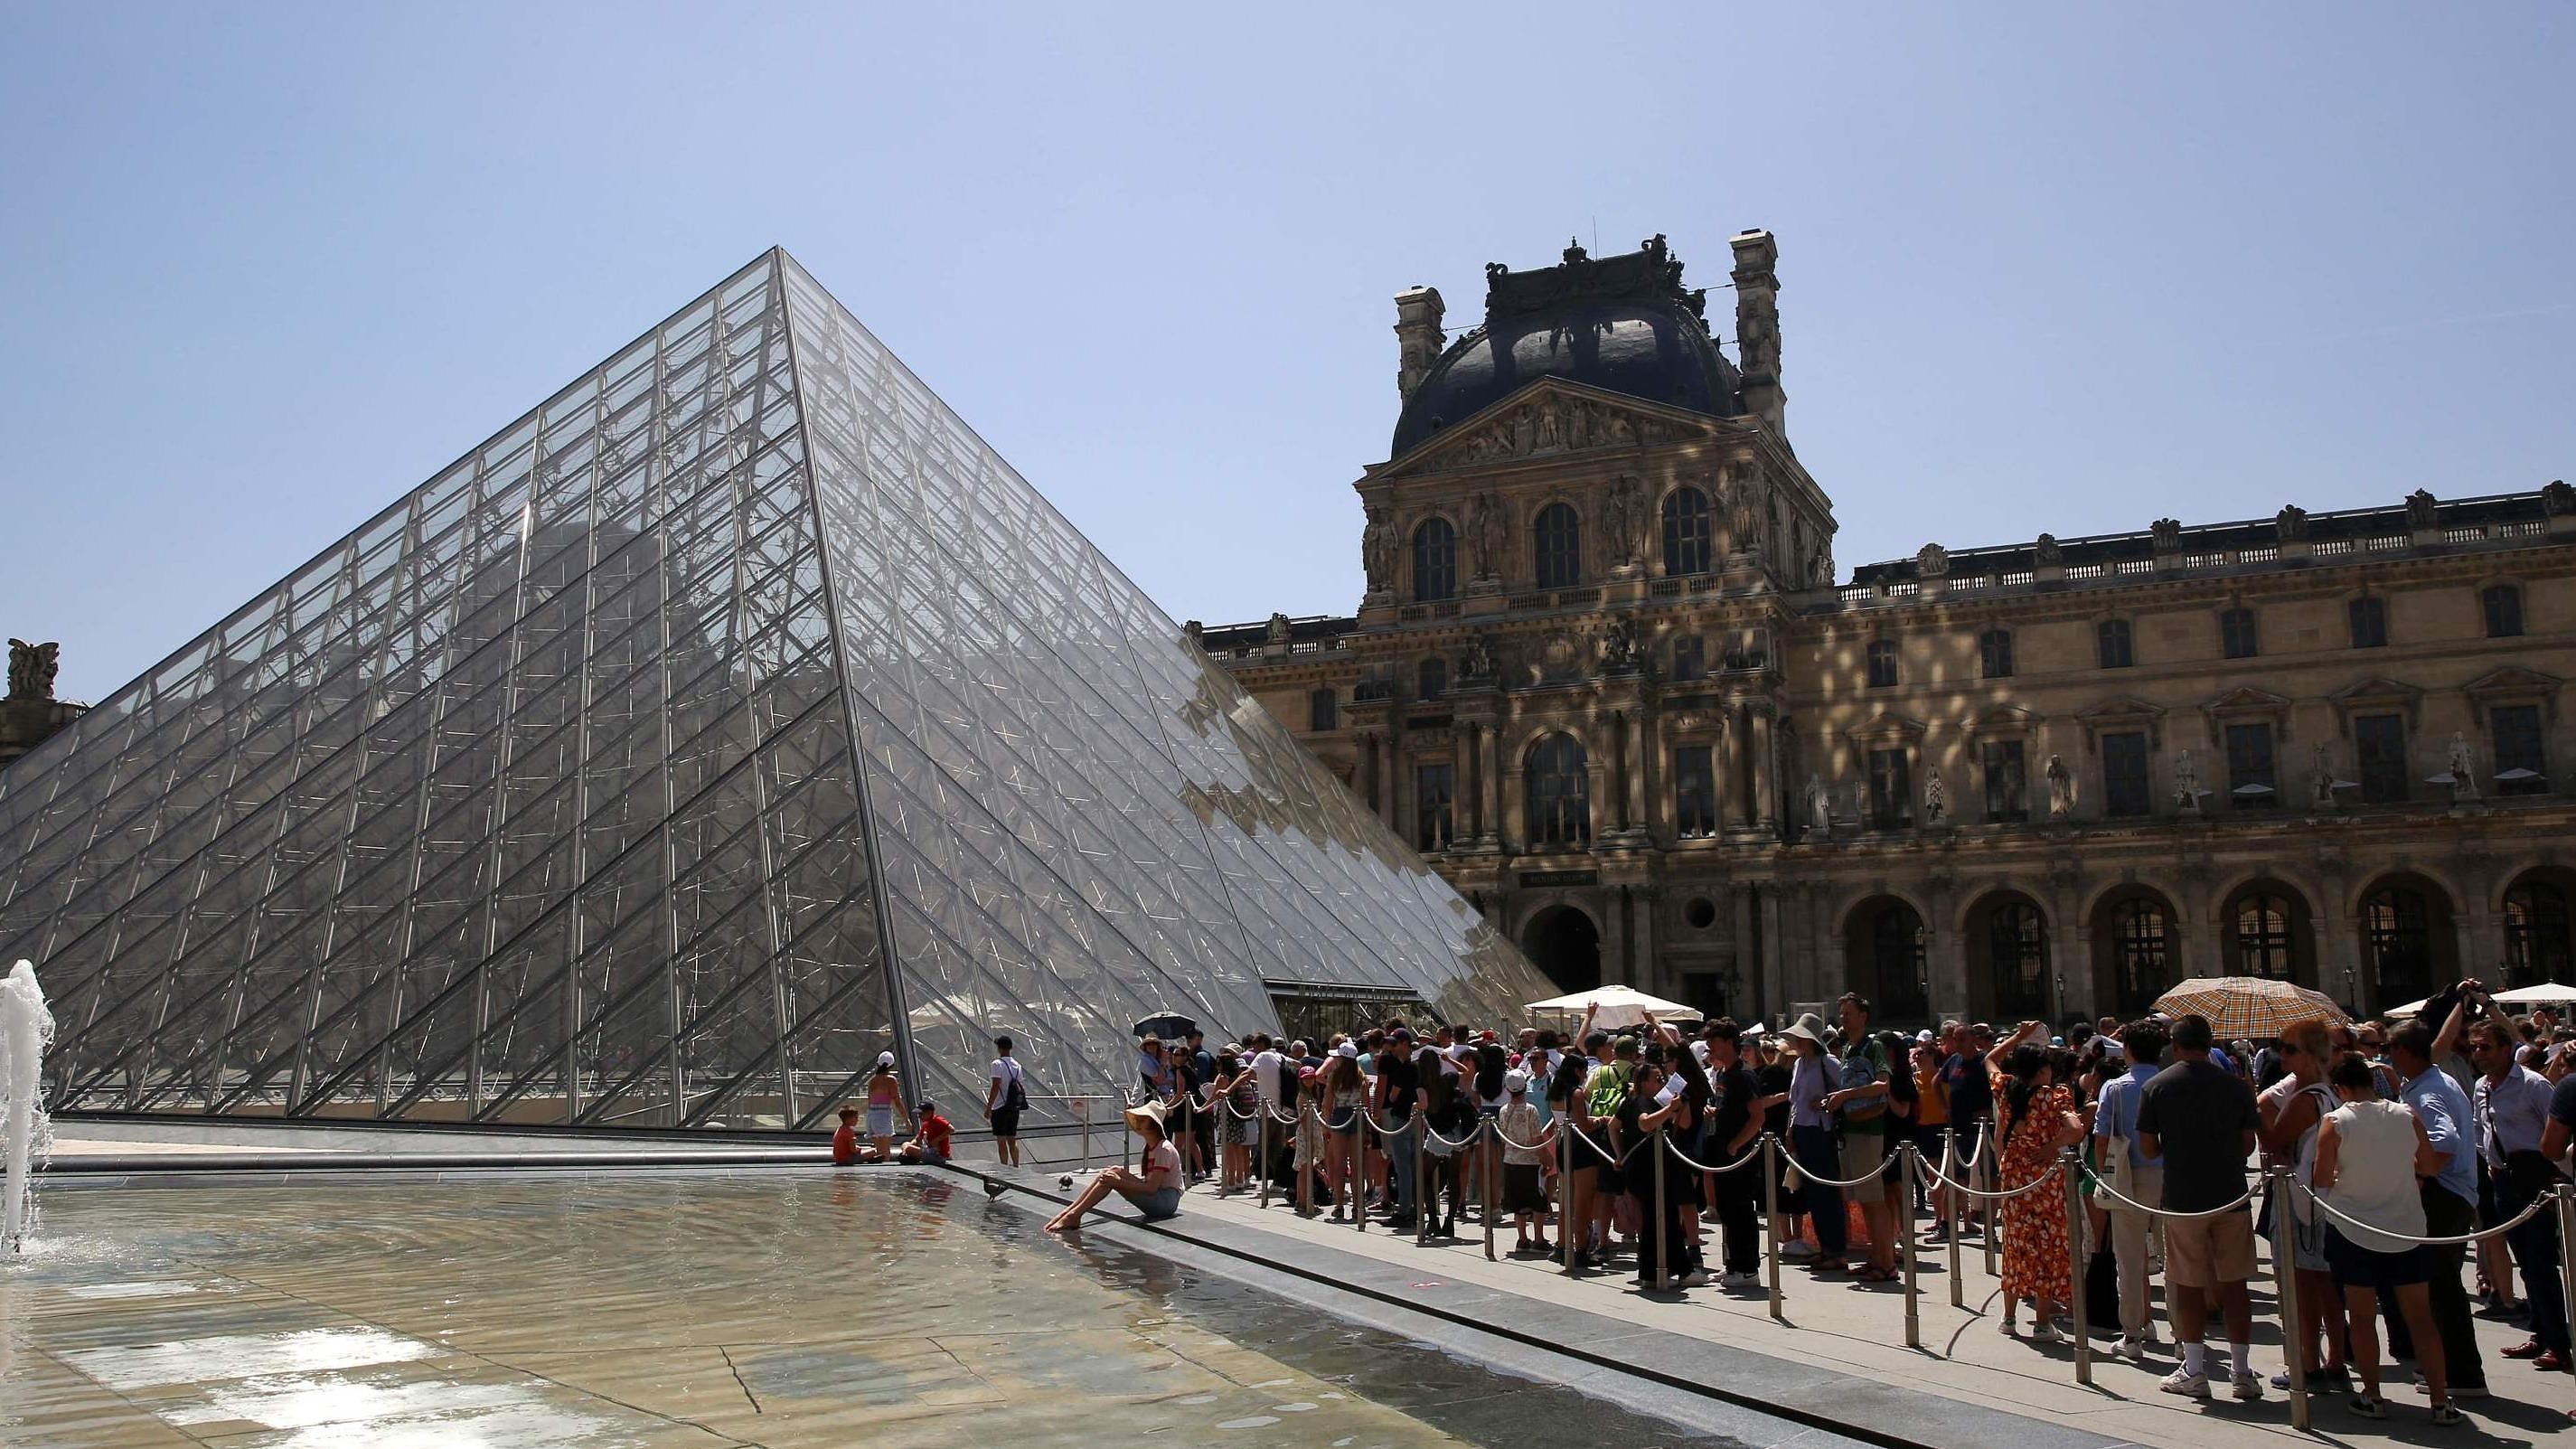 The Louvre returns to its pre-Covid attendance with nearly 9 million visitors in 2023